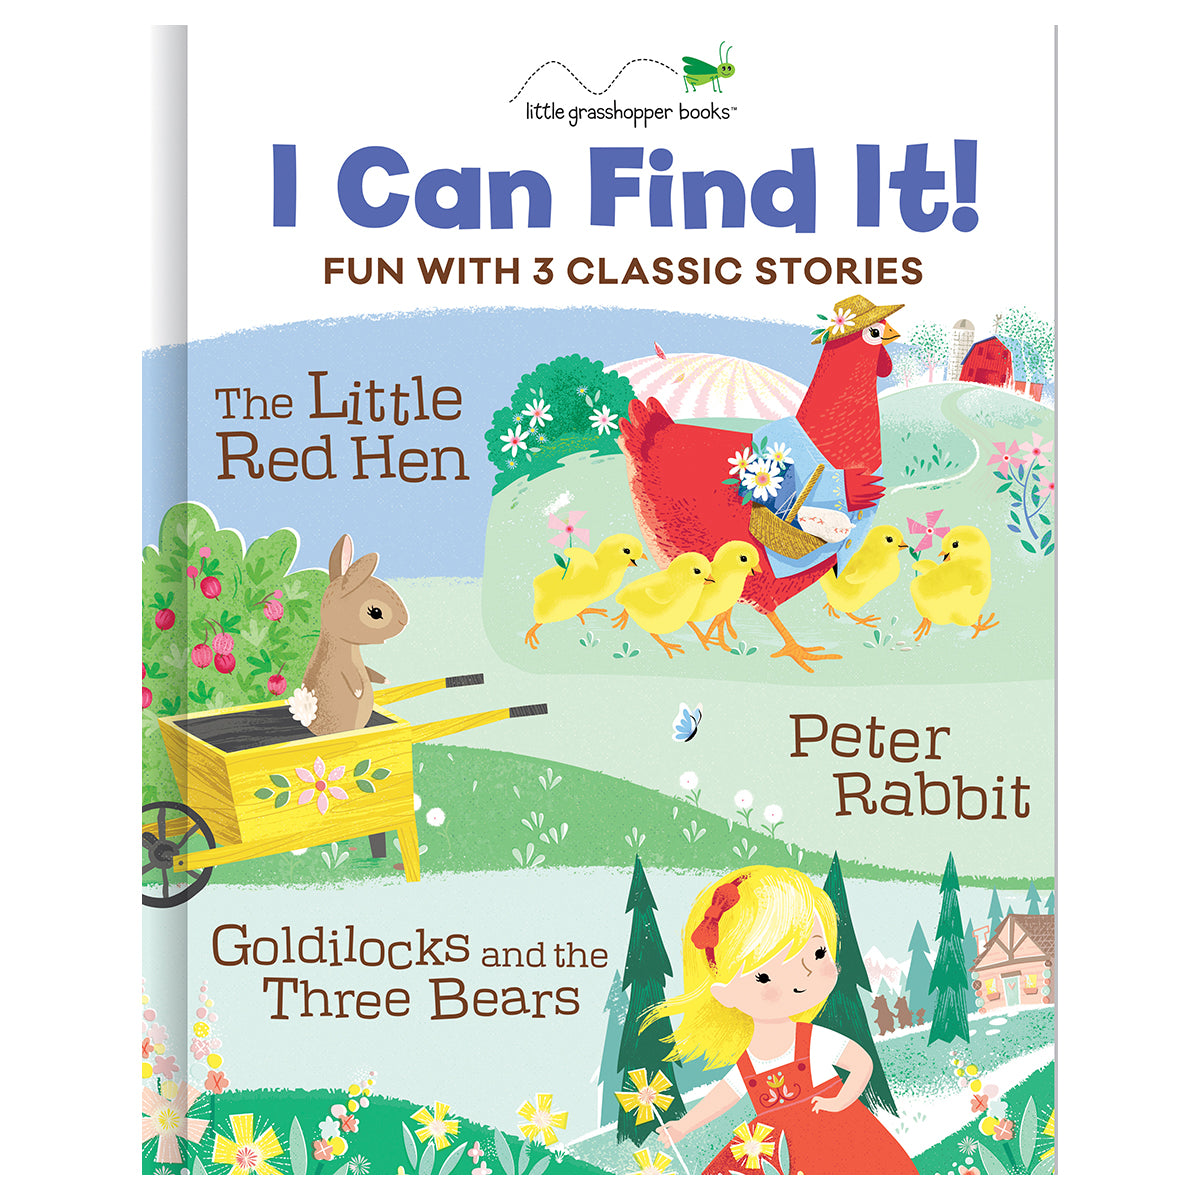 I Can Find It! Fun with 3 Classic Stories Large Padded Board Book